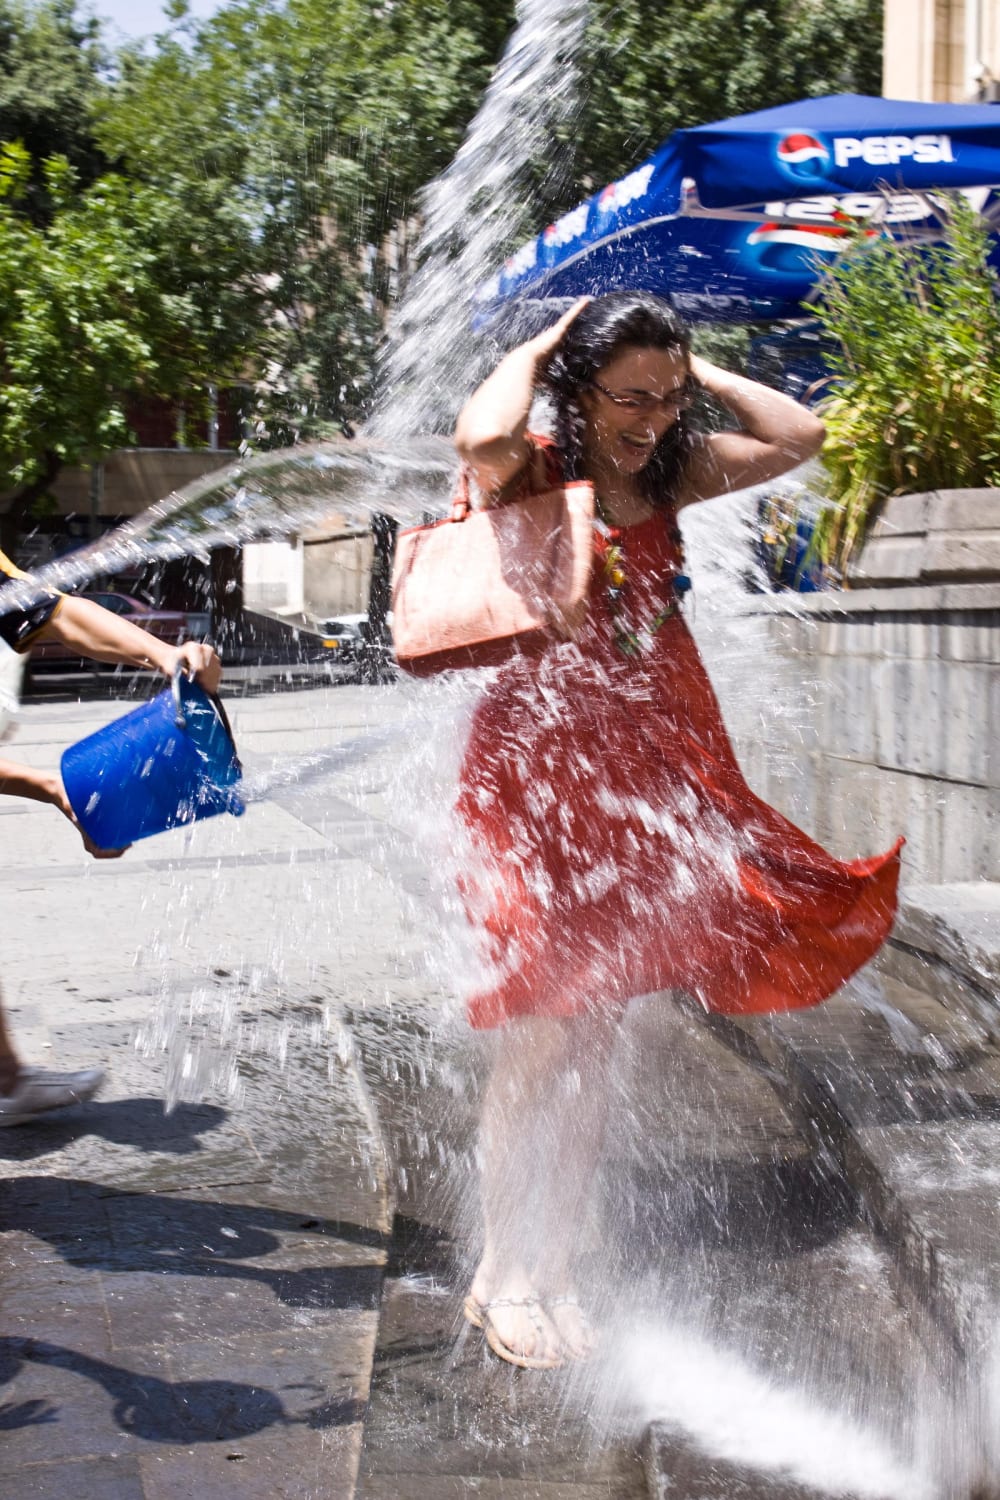 The Point of Armenia's Splashy Holiday Is Getting Wet